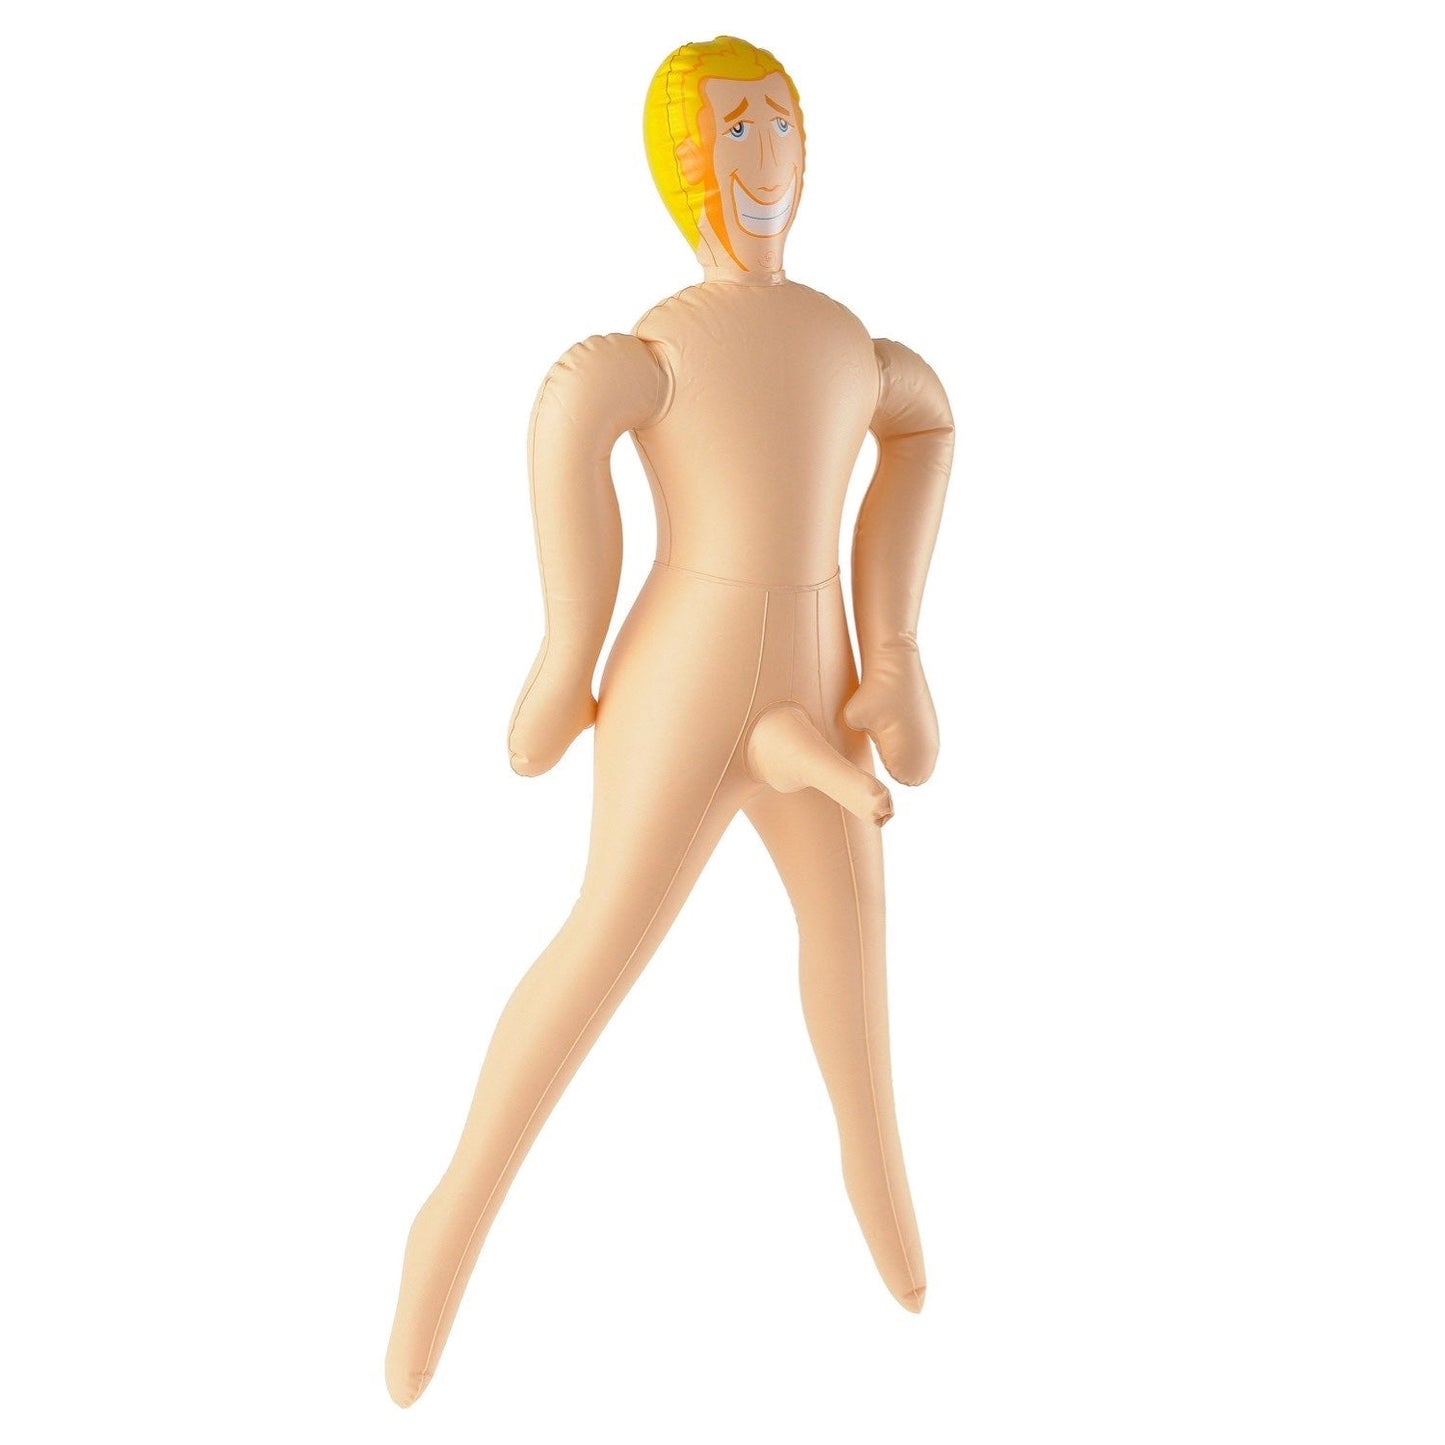 Travel-size John - Miniature Inflatable Male Love Doll